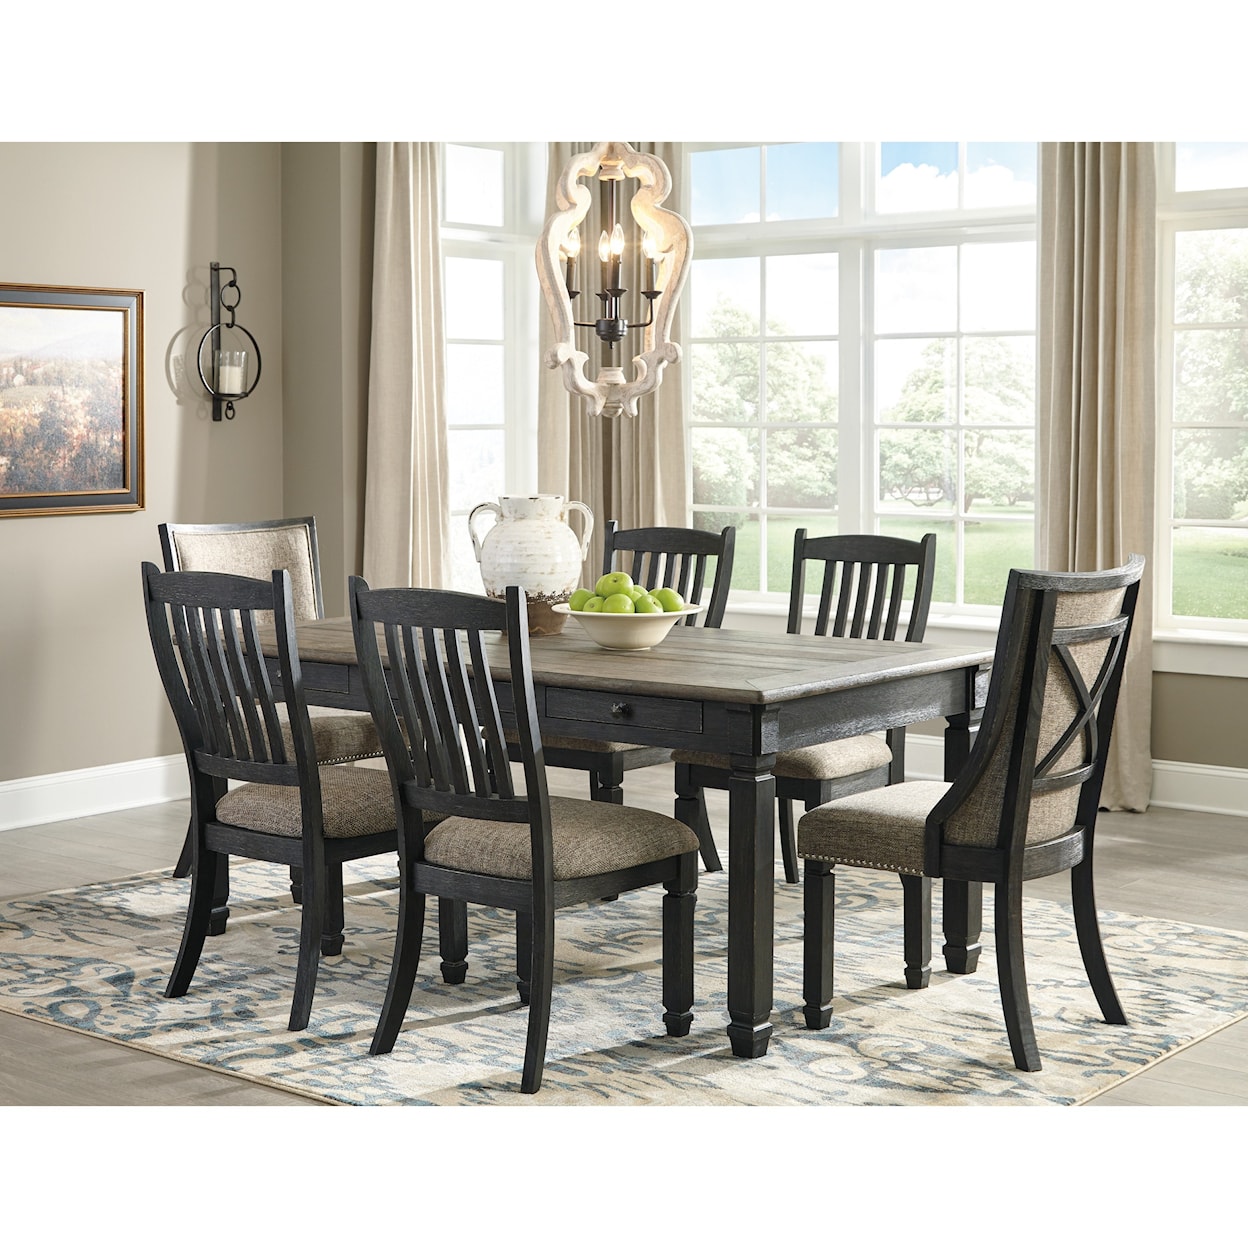 Signature Design by Ashley Tyler Creek 7-Piece Table and Chair Set